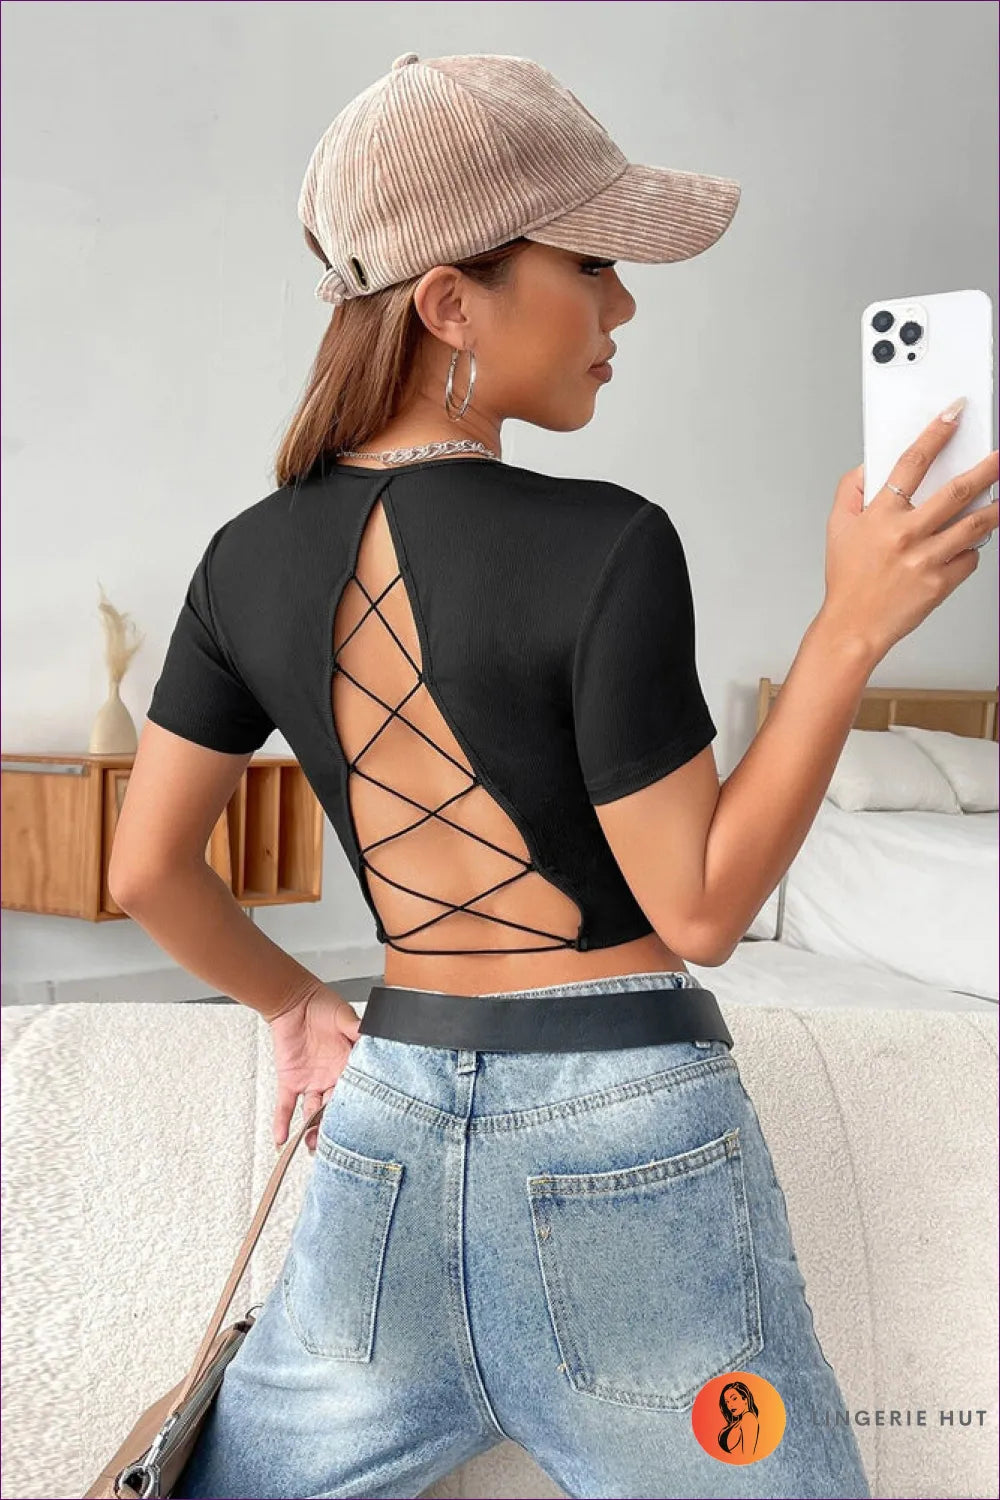 Elevate Your Style With Our Backless Short Sleeve Top. Scoop Neckline, Strappy Backless Design, And Versatile